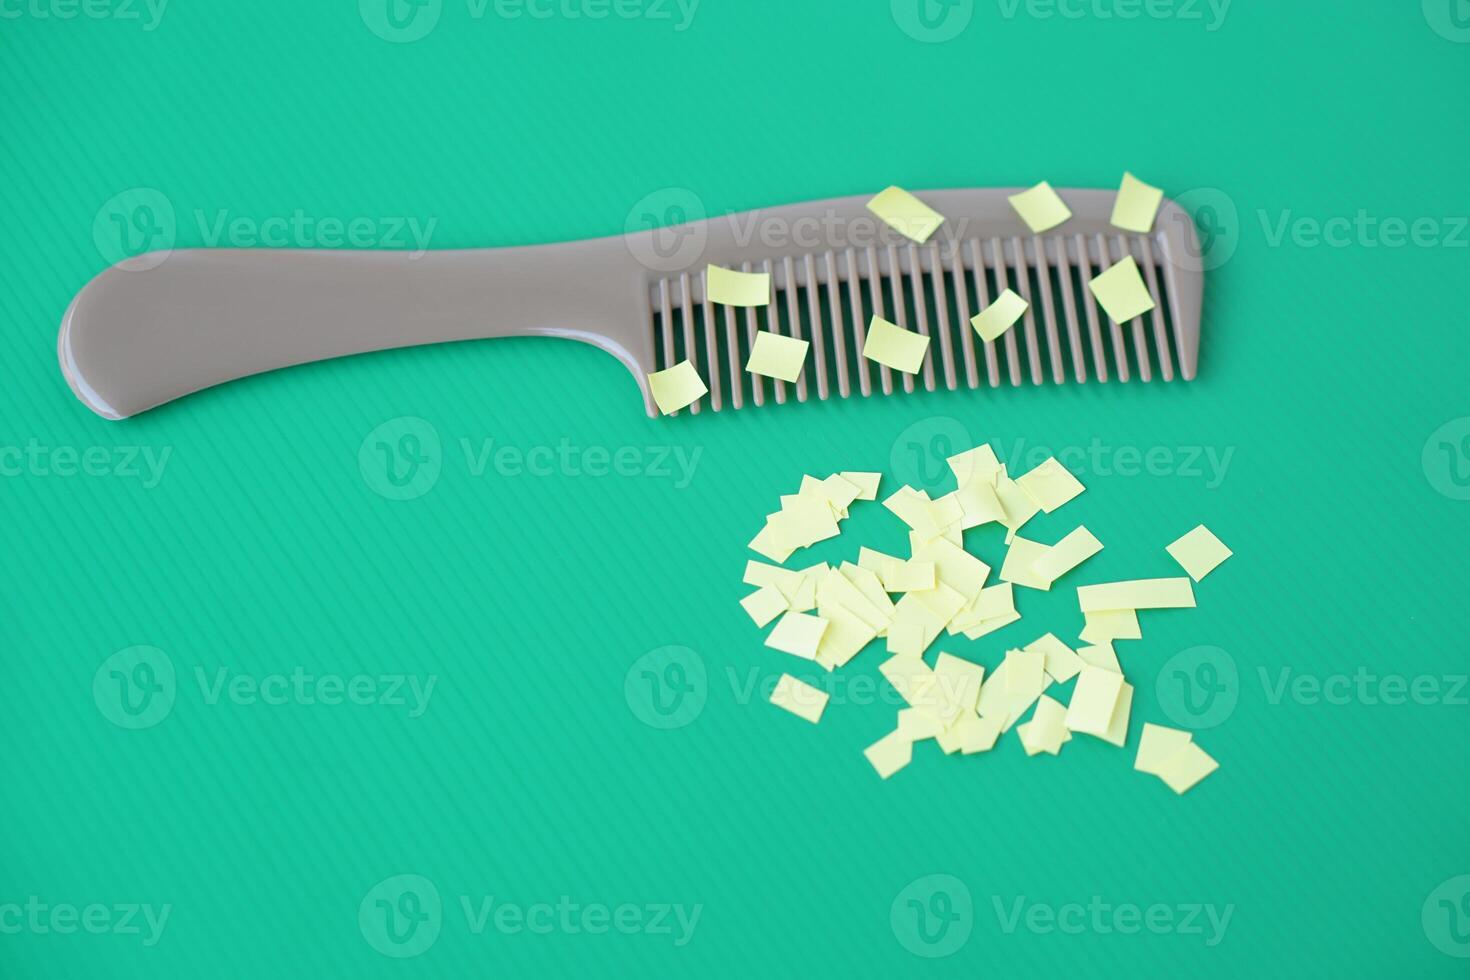 Comb and small pieces of paper. Equipment, prepared to do experiment about static electricity. Green background. Concept, Science lesson, fun and easy experiment. Education. Teaching aids. photo